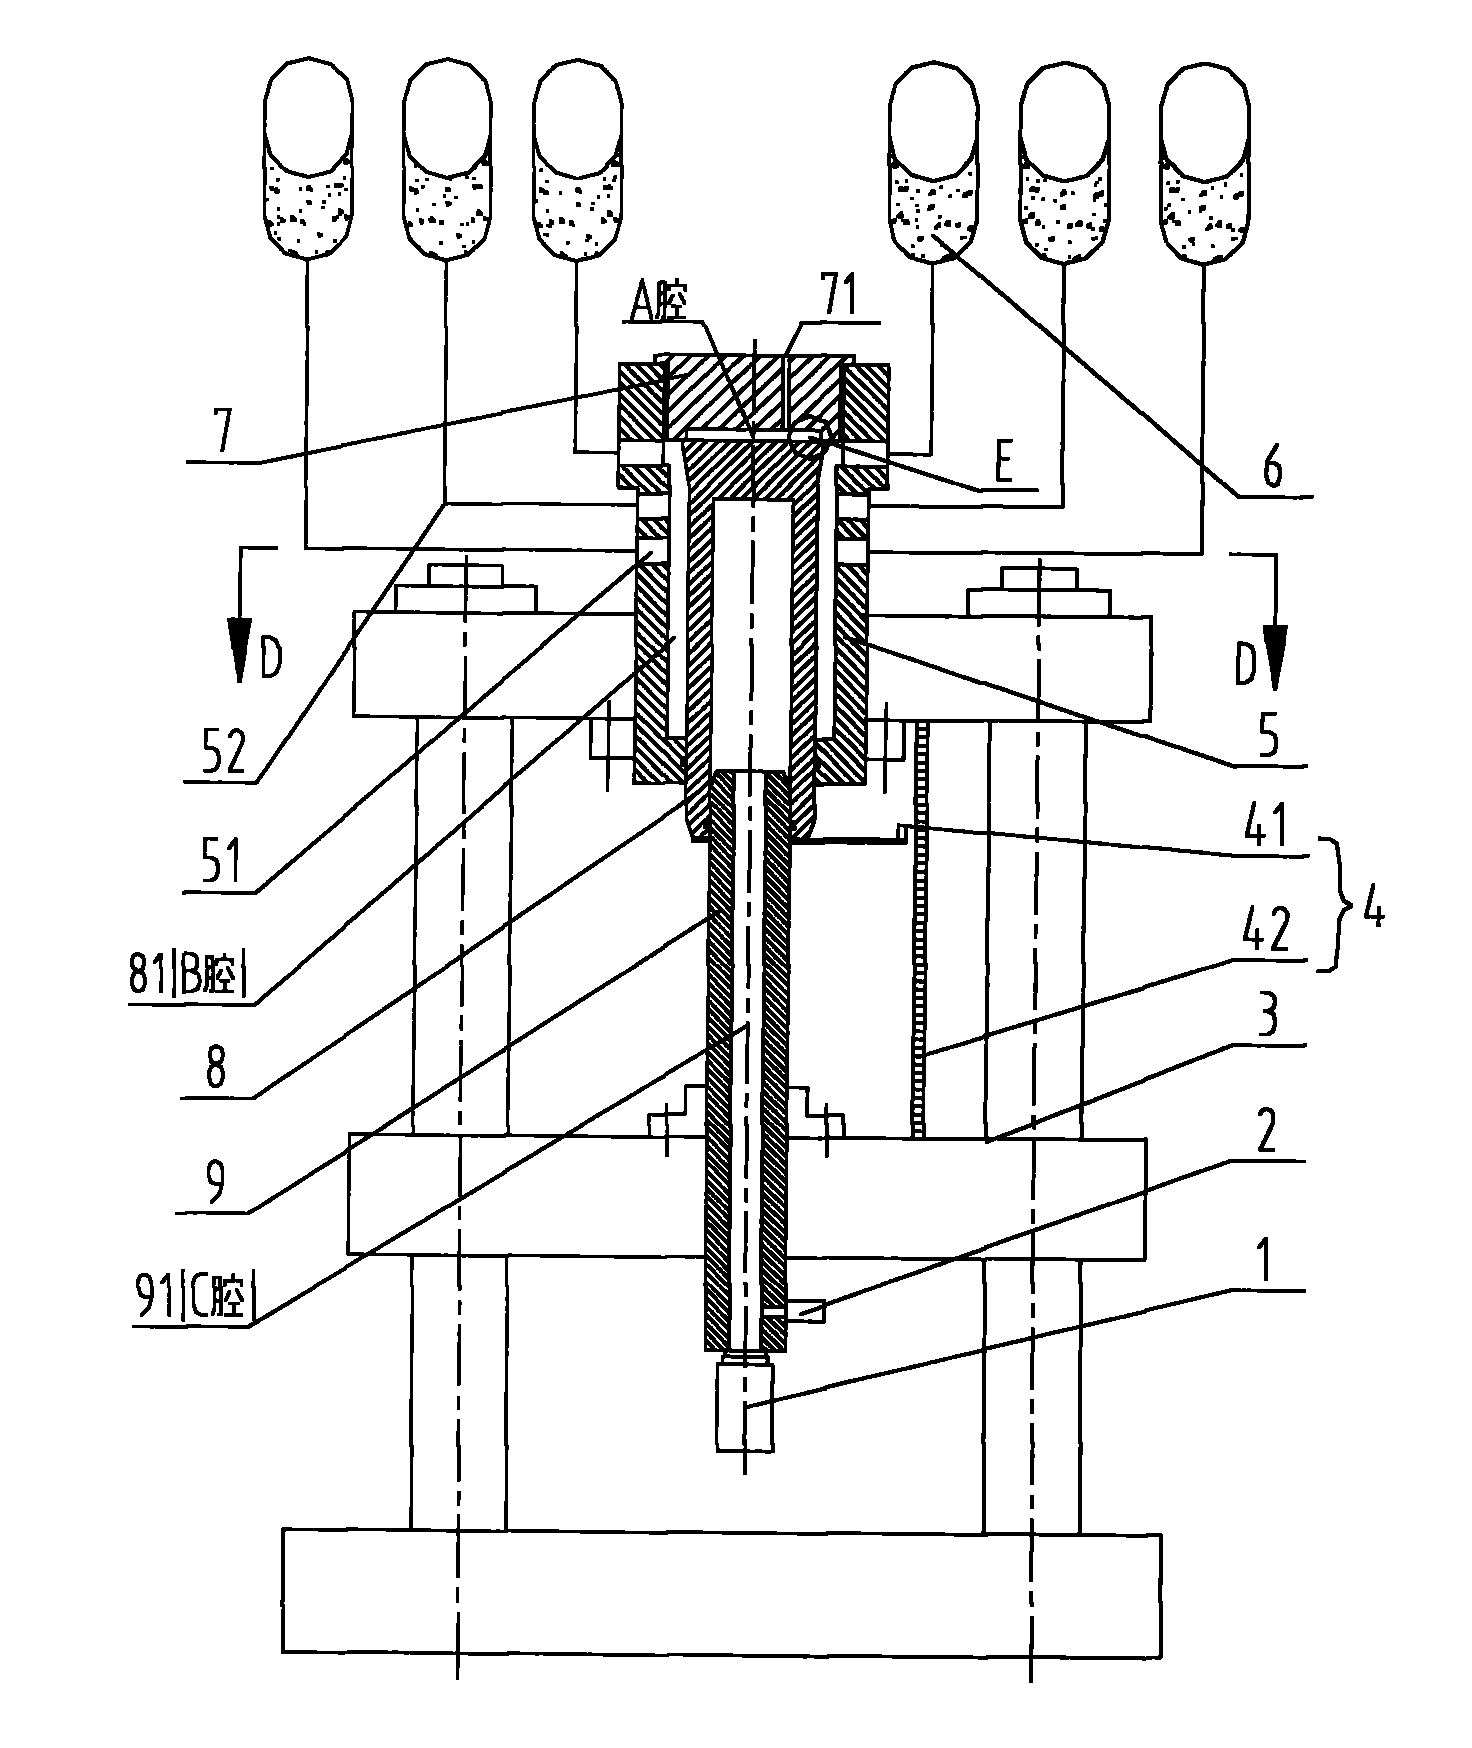 Quickly loading booster cylinder and high-flow safety valve test device using same